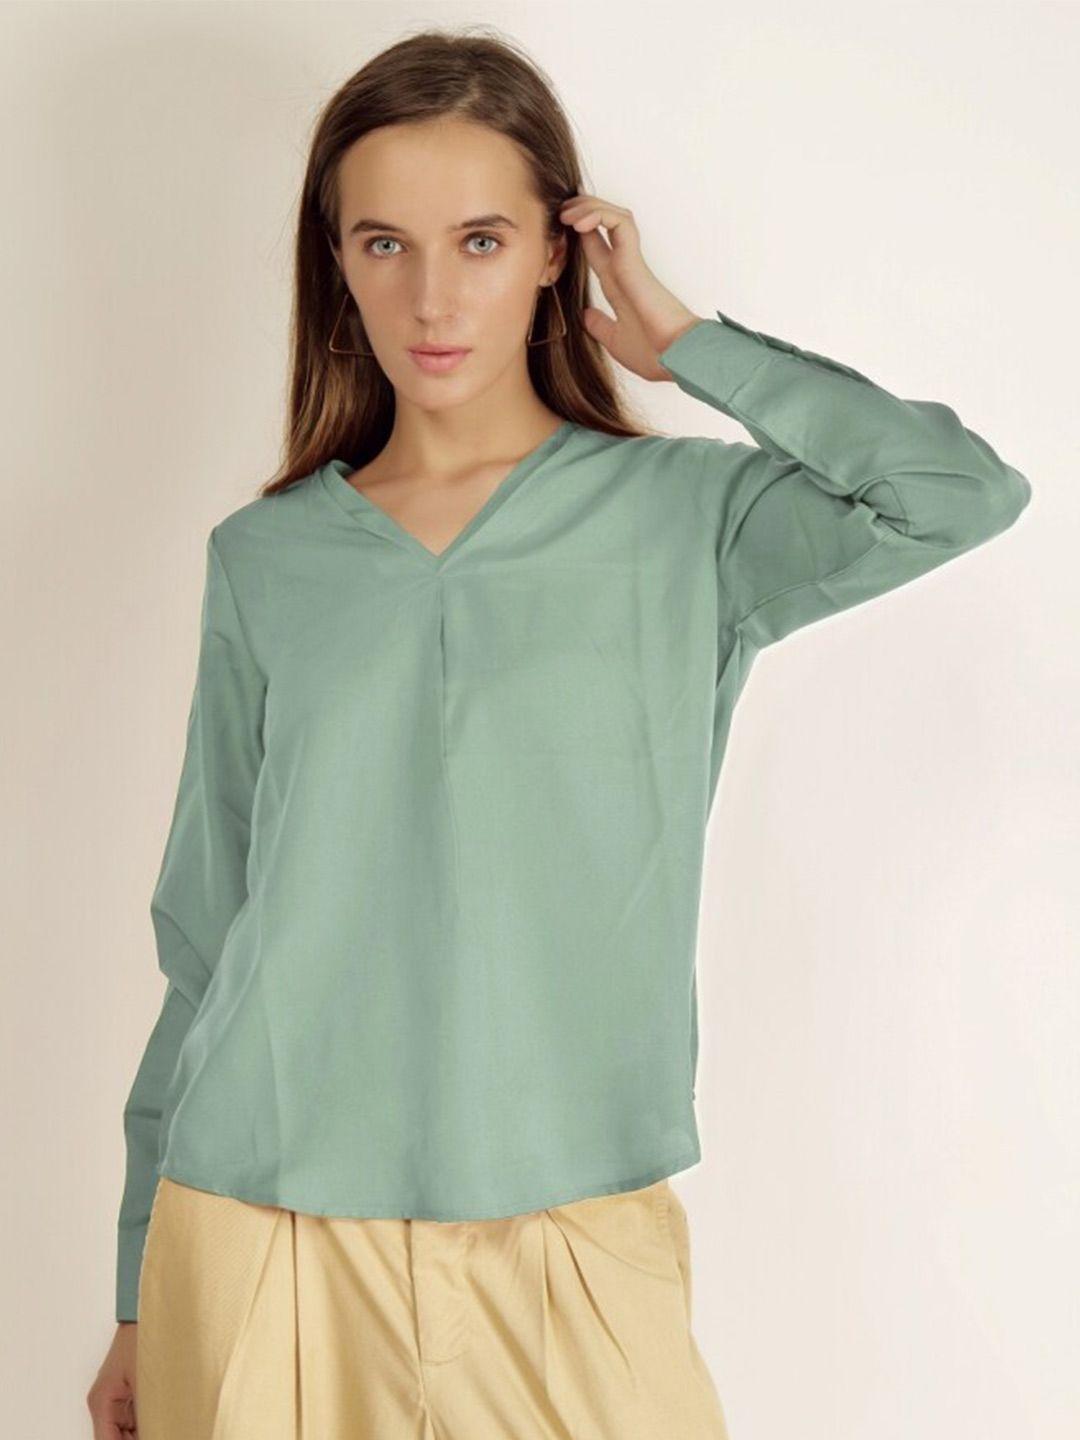 invictus v-neck cuffed sleeves top